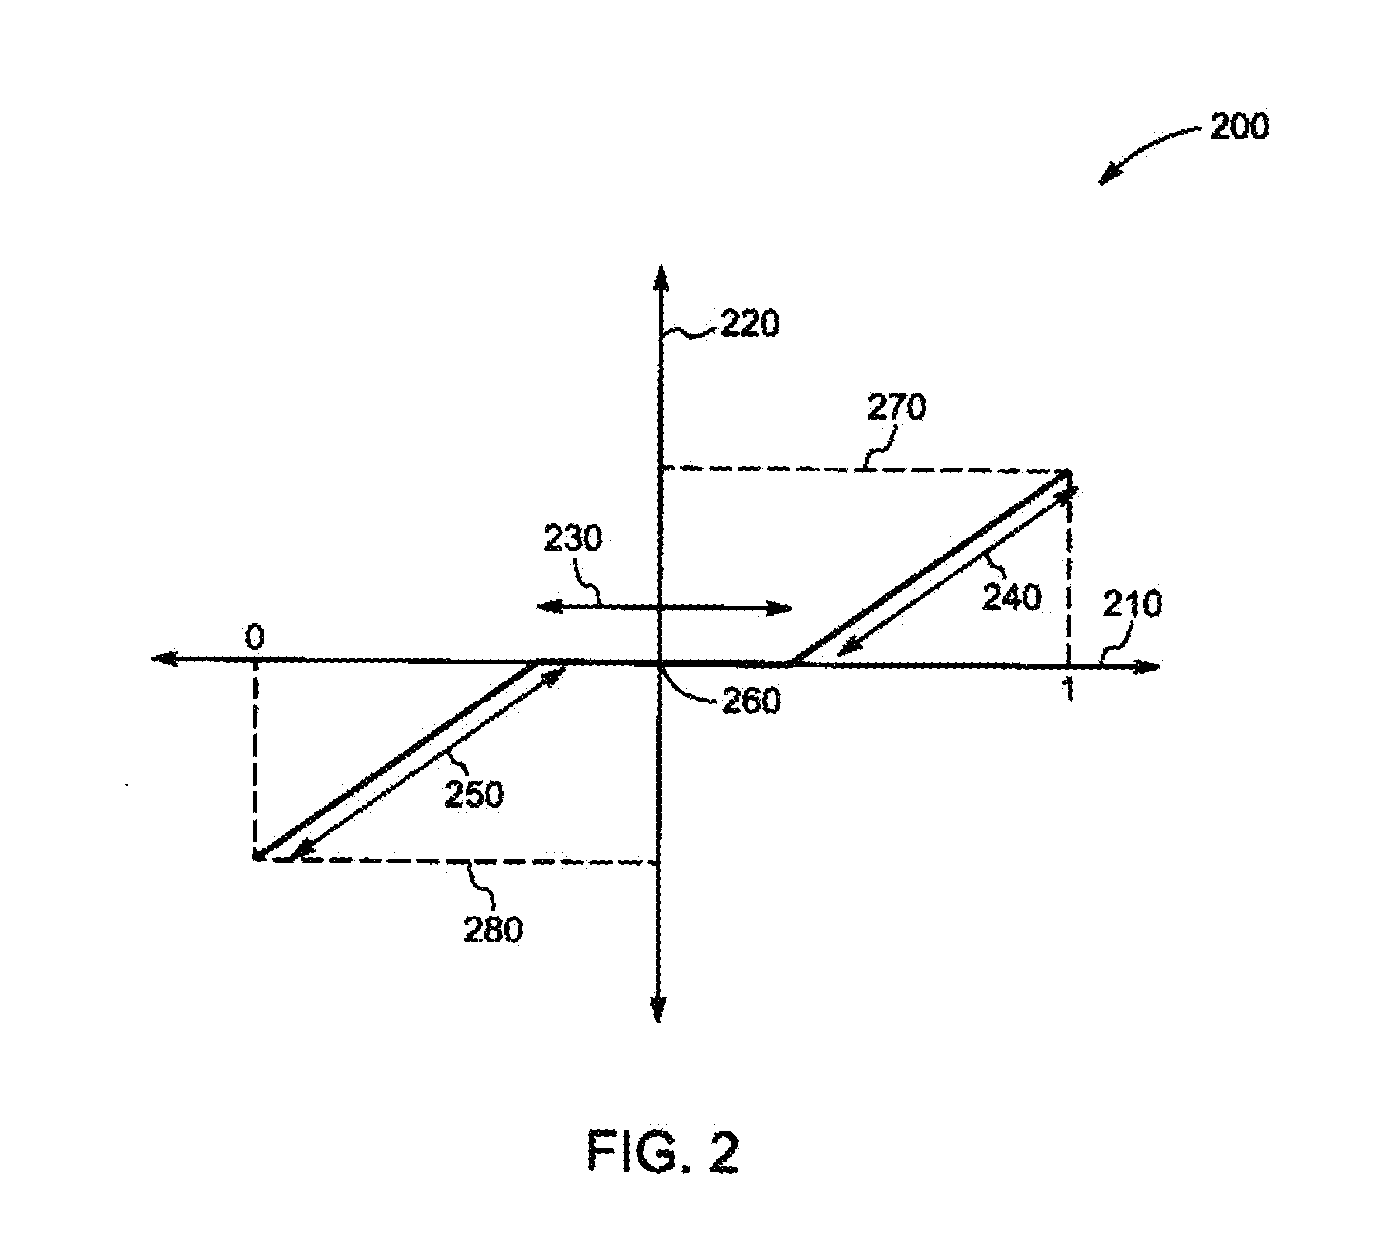 System and method for automatic generation control in wind farms